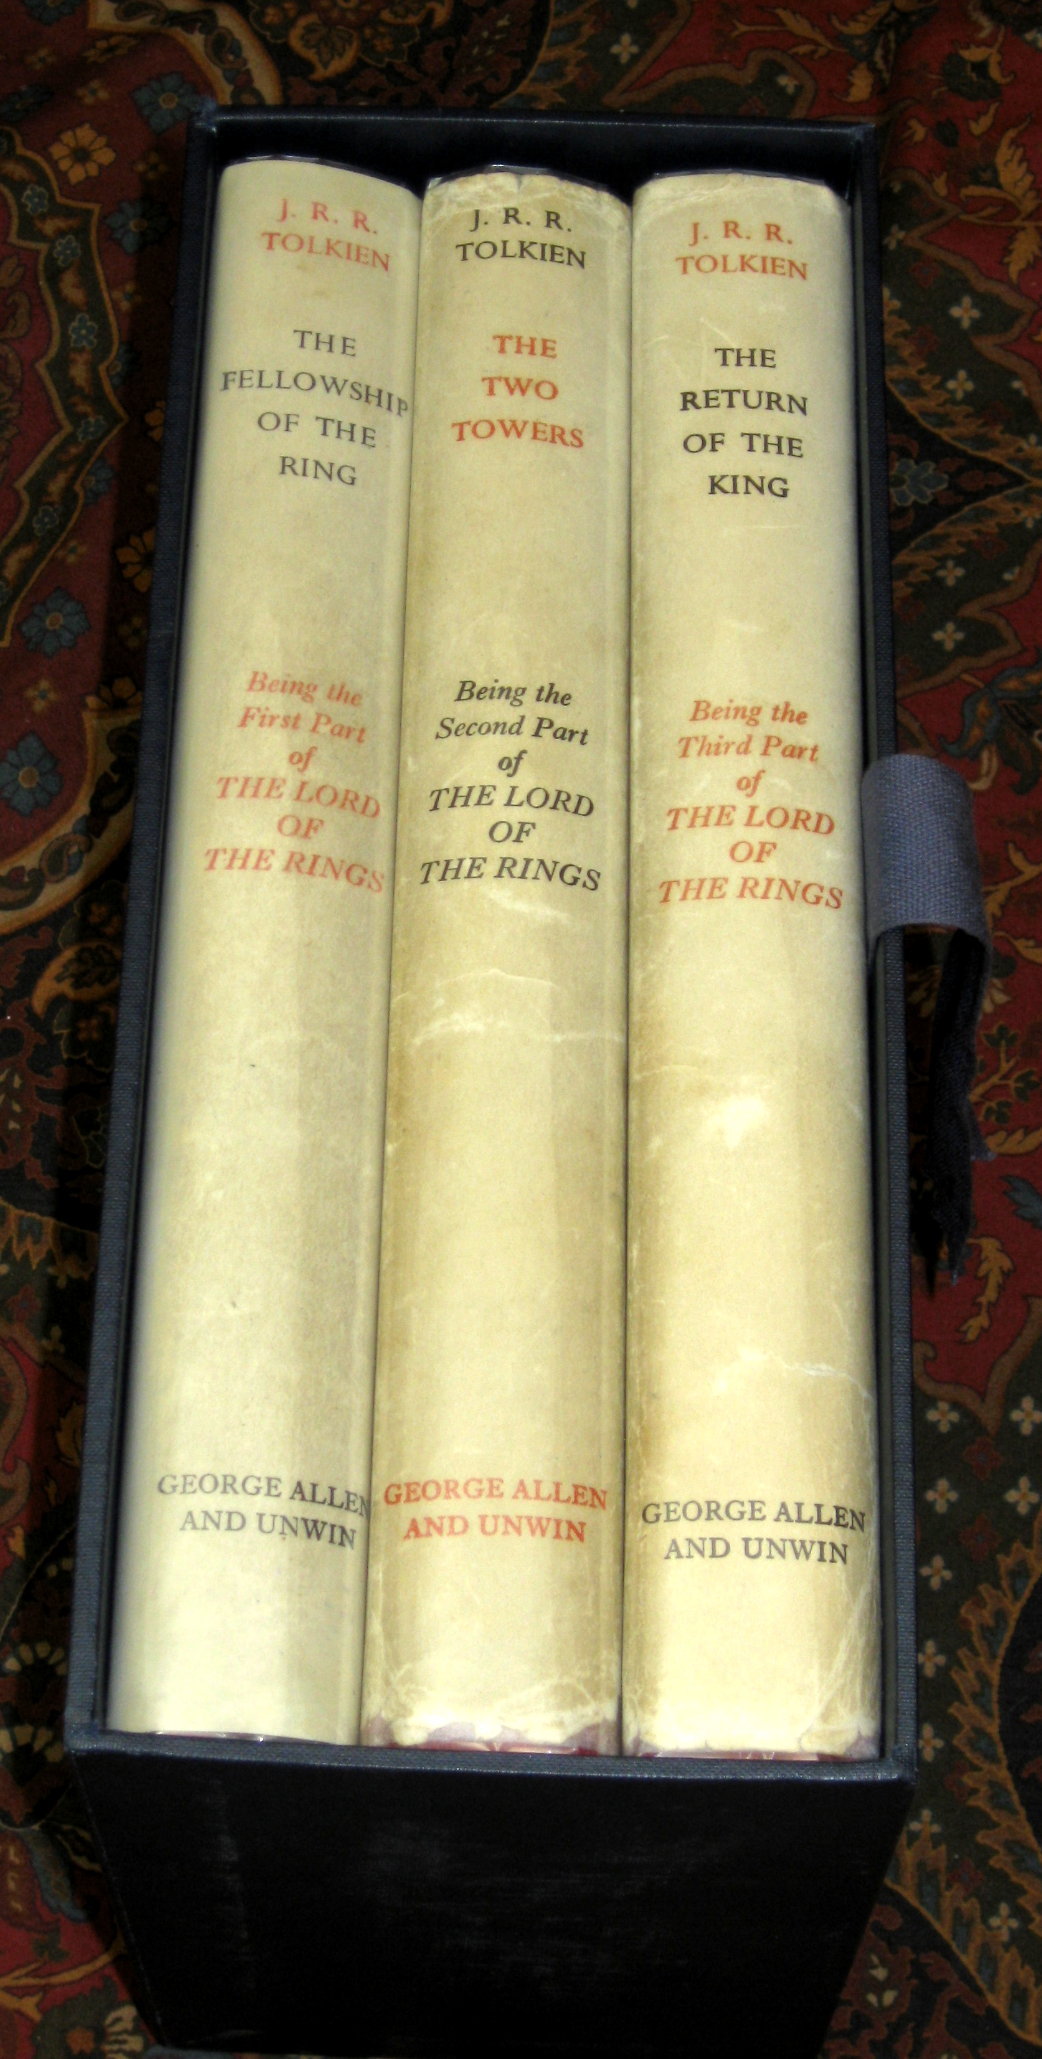 A beautiful, collectable set of first editions of this classic of fantasy literature. 